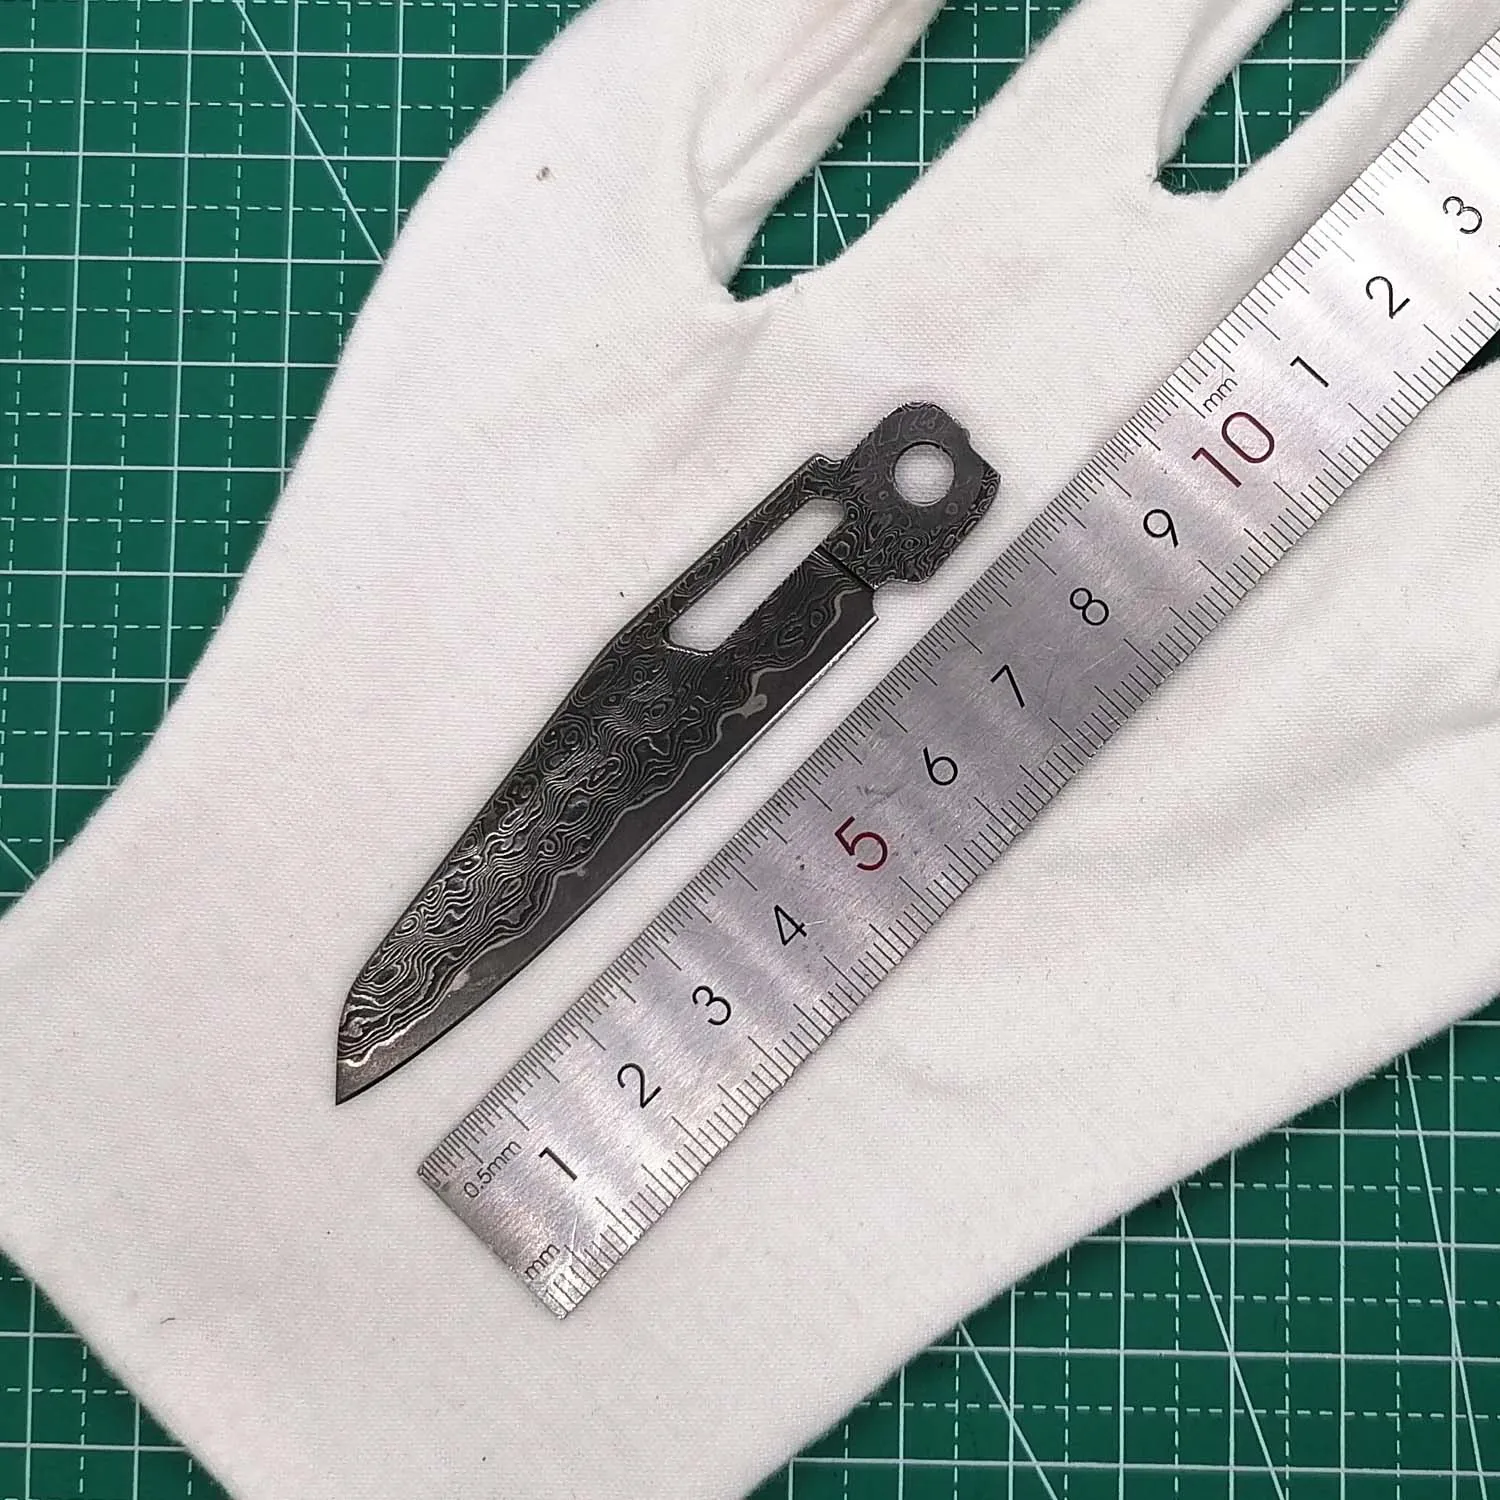 

1 Piece DIY Replacement VG10 Core Damascus Knife Blade for Leatherman Signal Modify Accessories (PLIERS NOT INCLUDED)